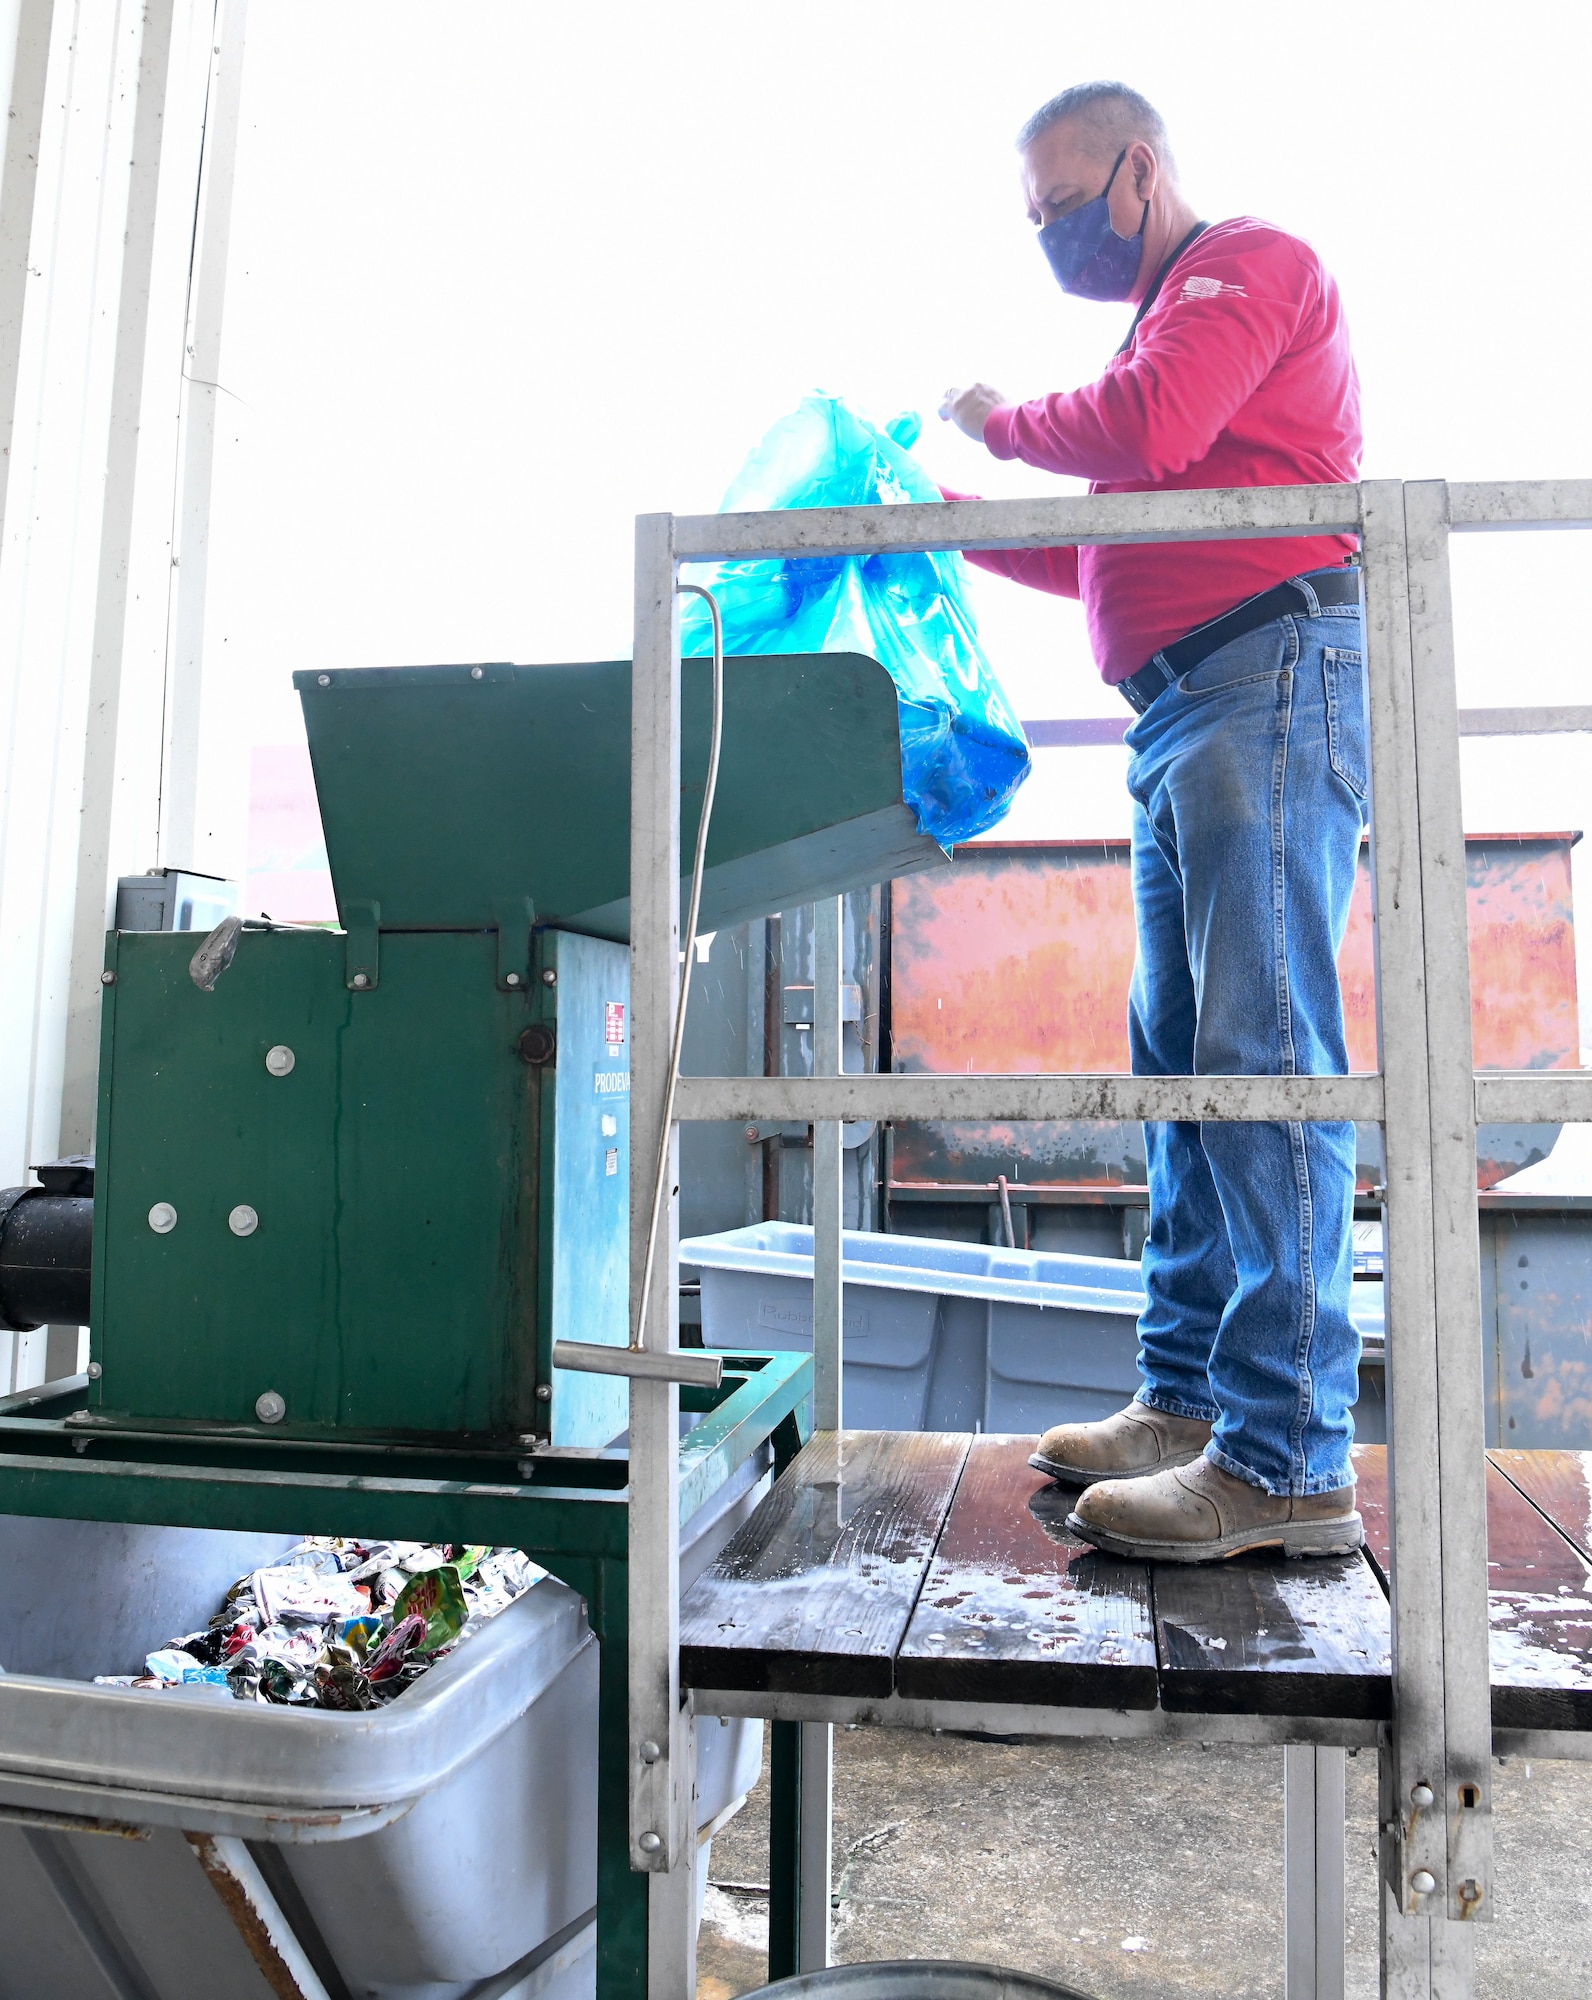 Bud Schell, a motor vehicle operator for the Arnold Air Force Base Services Recycling Program, empties a bag of aluminum cans into a crusher outside of the Recycling Facility at Arnold AFB, Tenn., Feb. 11, 2021. (U.S. Air Force photo by Jill Pickett)